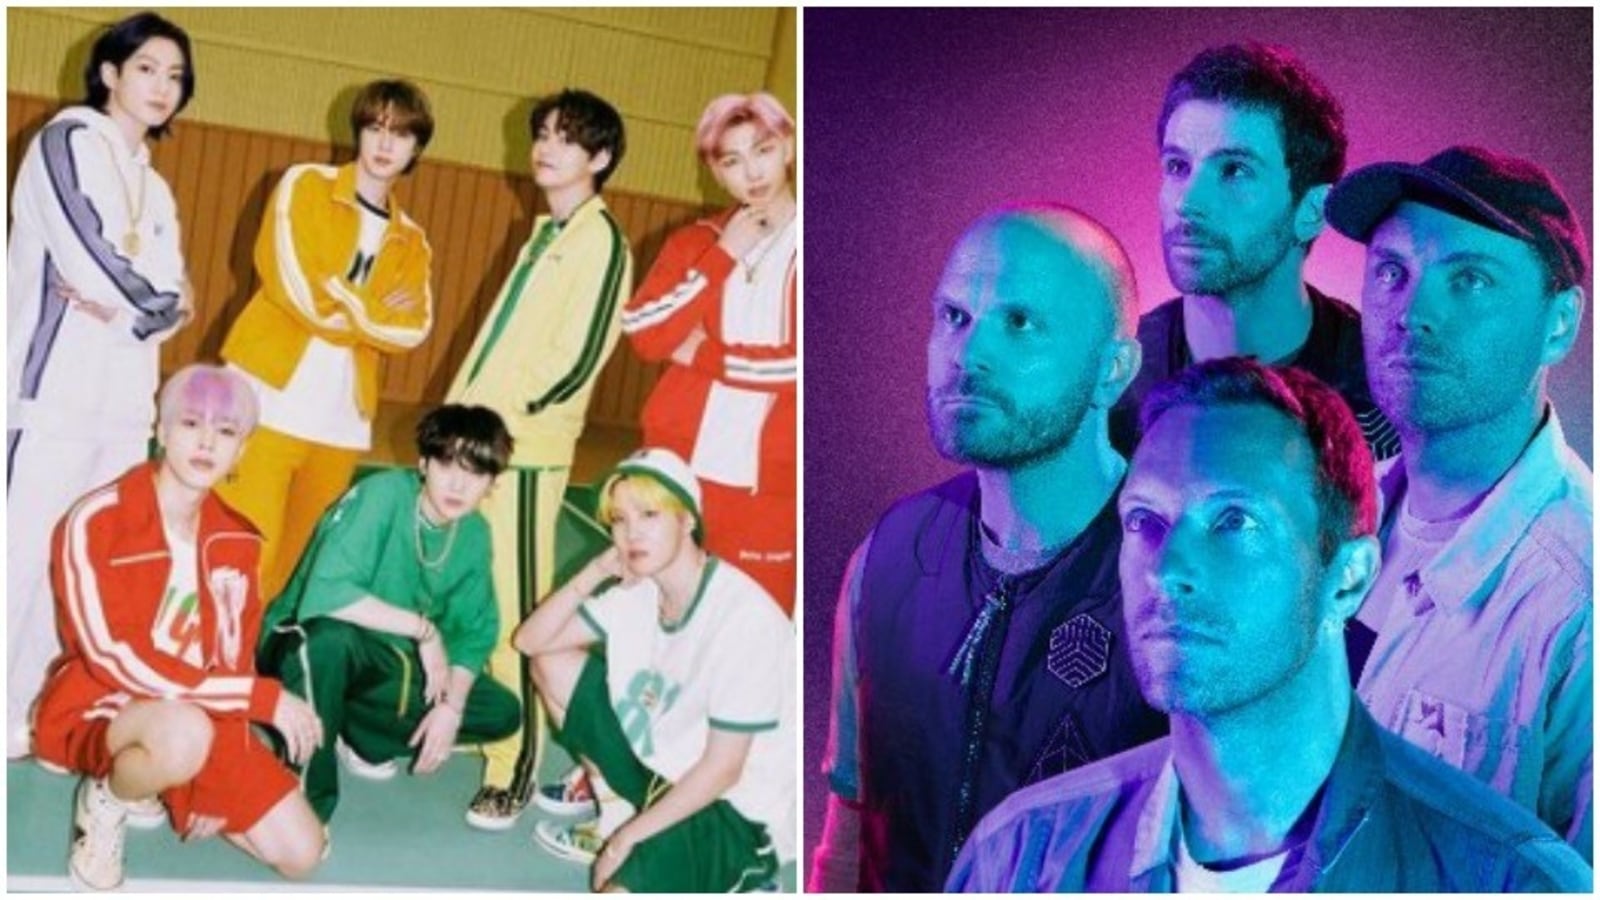 Coldplay comes to BTS' defense, as German host downplays the K-pop band's  contributions